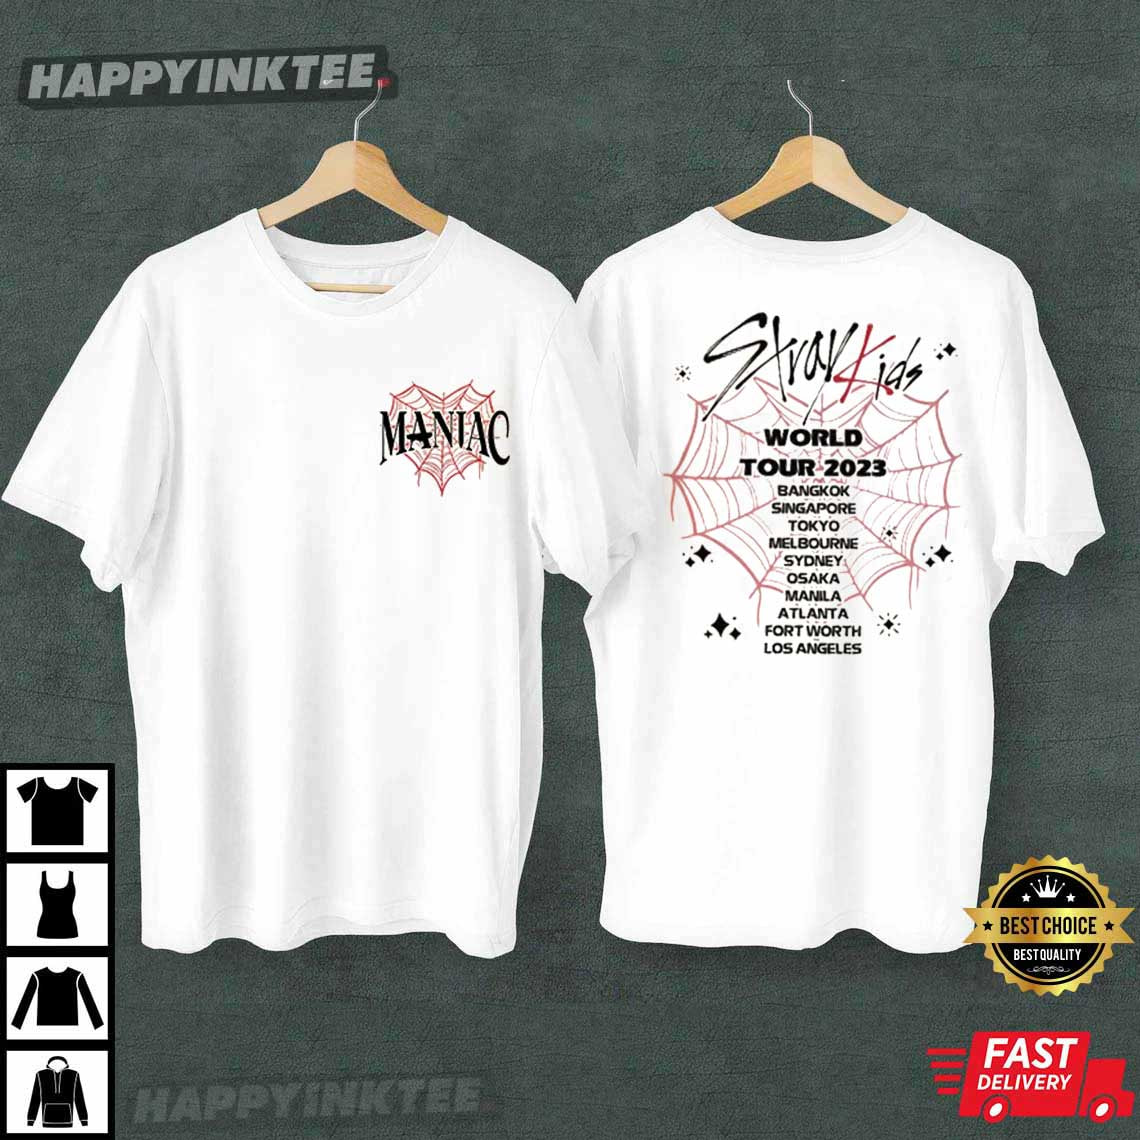 Stray Kids World Tour 2023 Gift - T-Shirt Imaginations And Ideas, Your Thoughts For Fan Bring